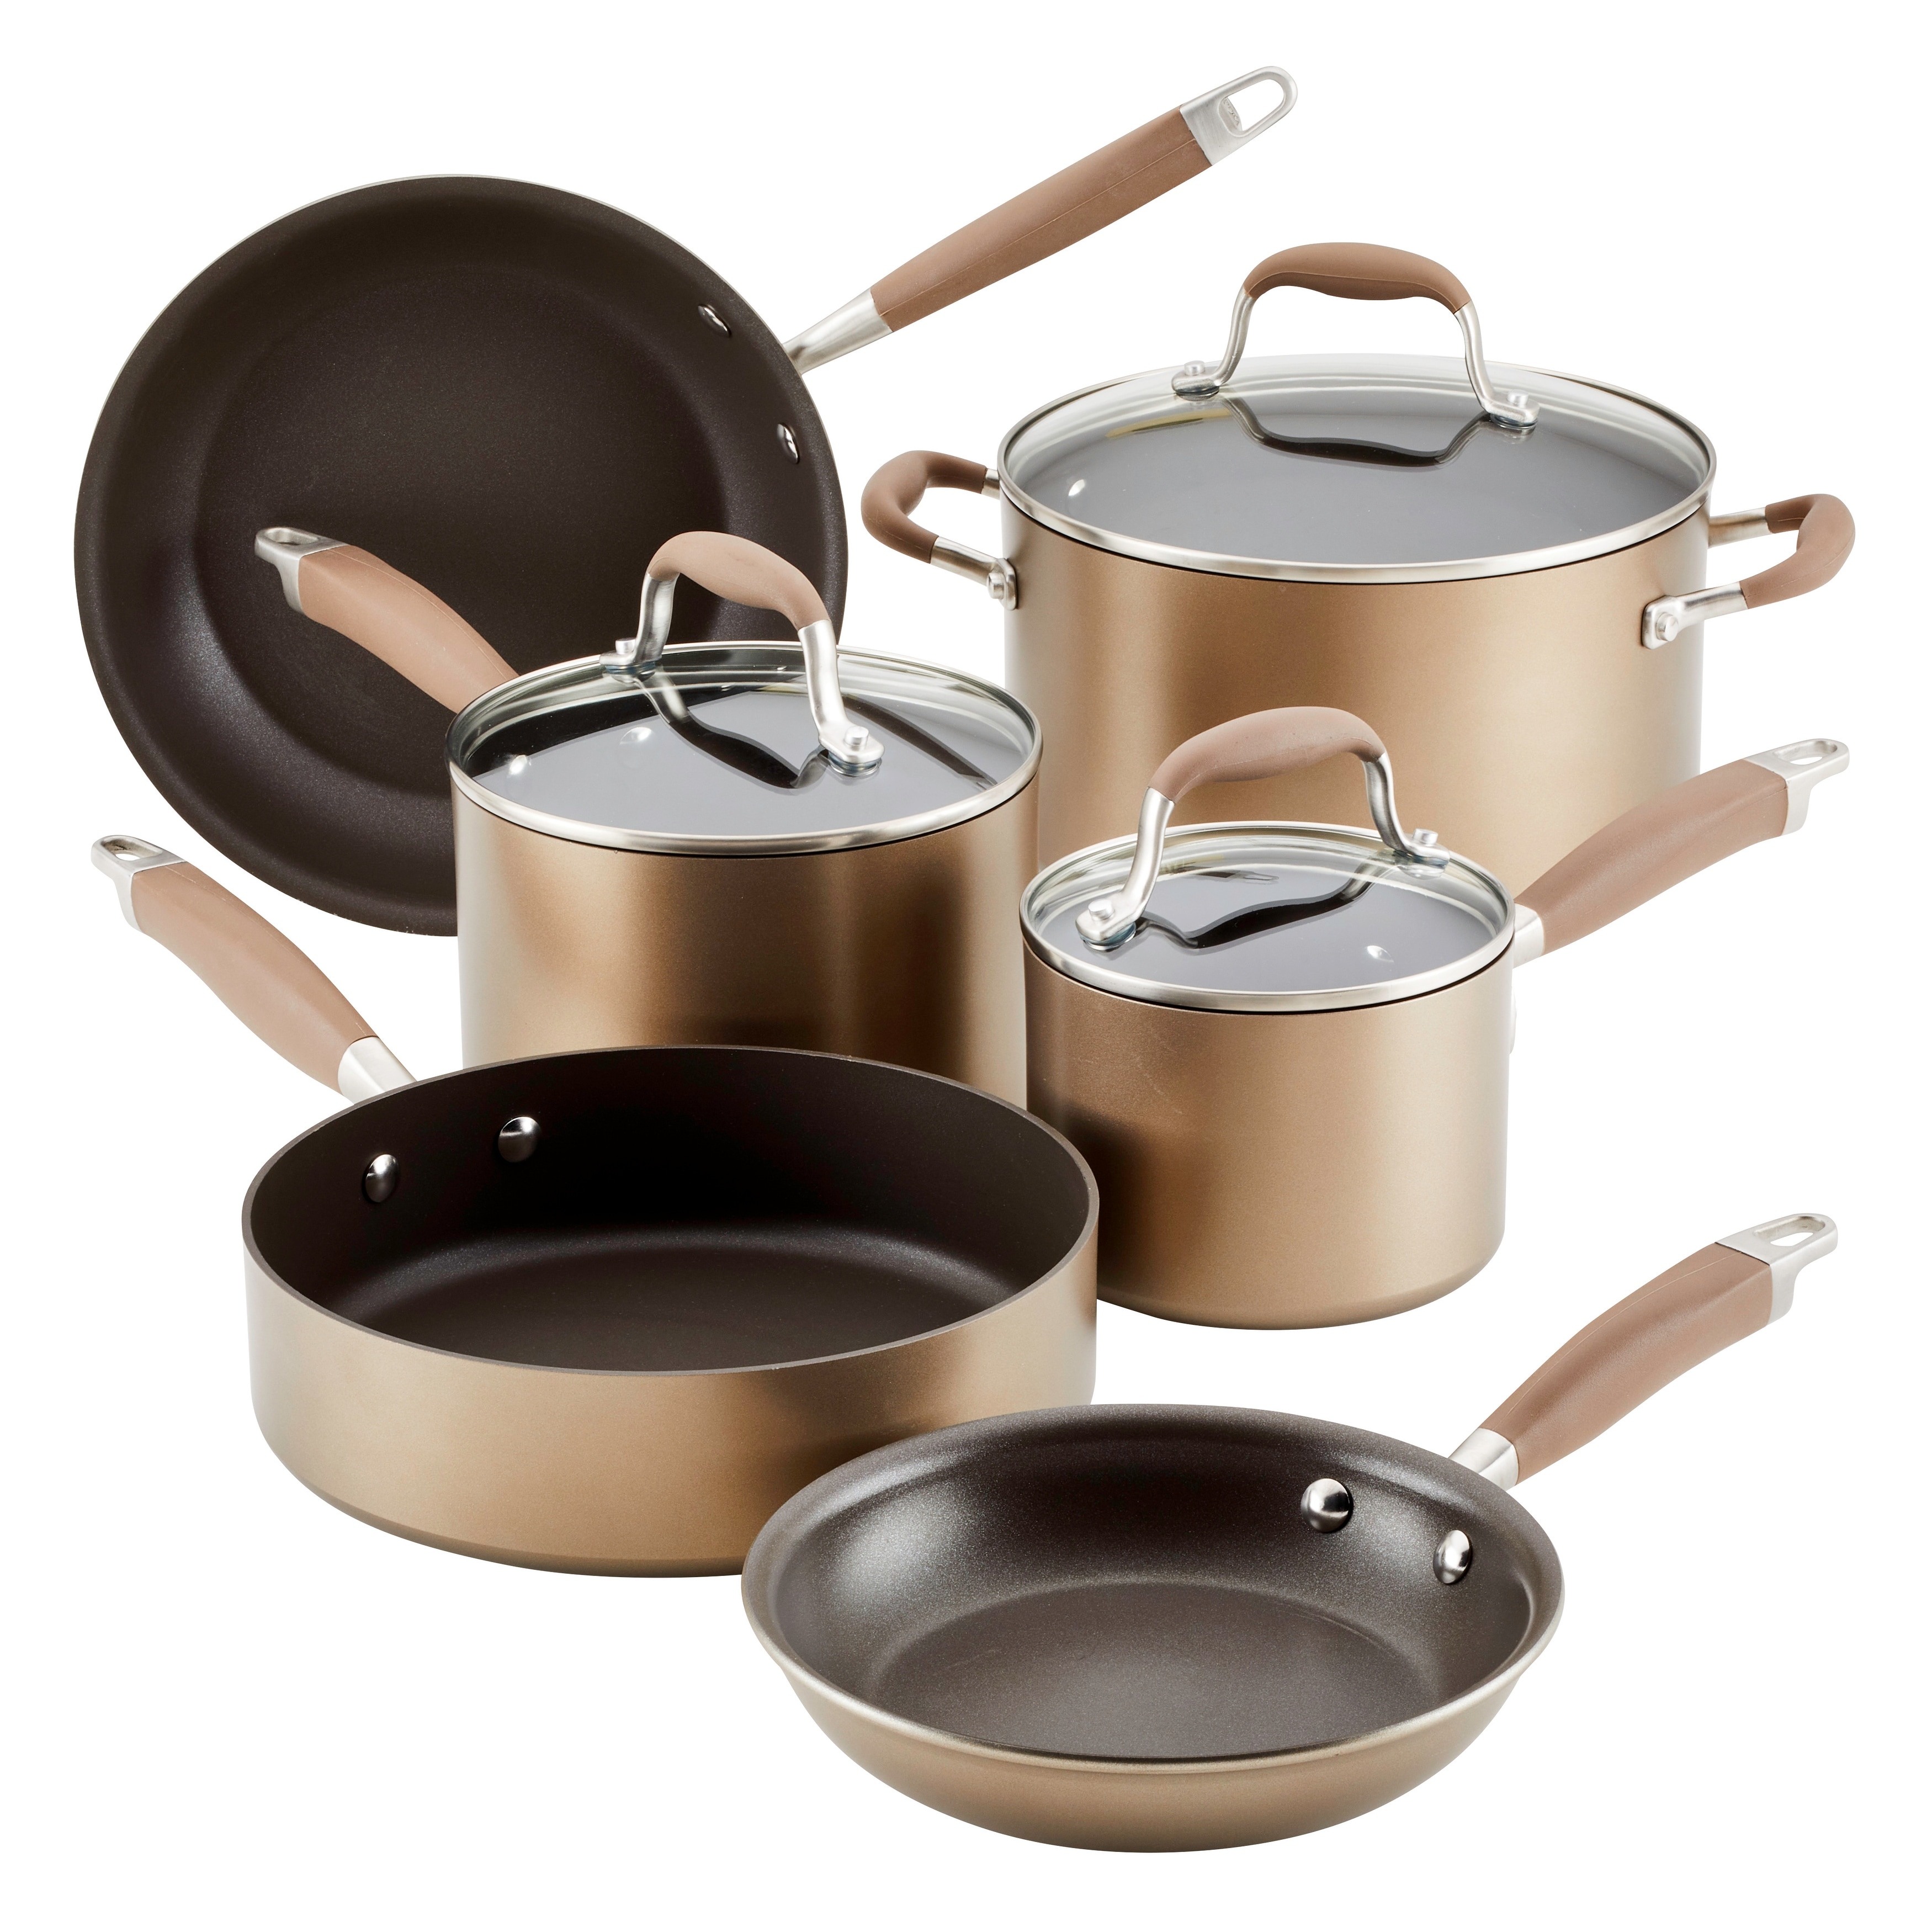 https://ak1.ostkcdn.com/images/products/is/images/direct/fa56a21214a7d9bbfbfaffd3a1134b20c421e9bb/Anolon-Advanced-Bronze-Hard-Anodized-Nonstick-Cookware-Set%2C-9-pc%2C-Gray.jpg